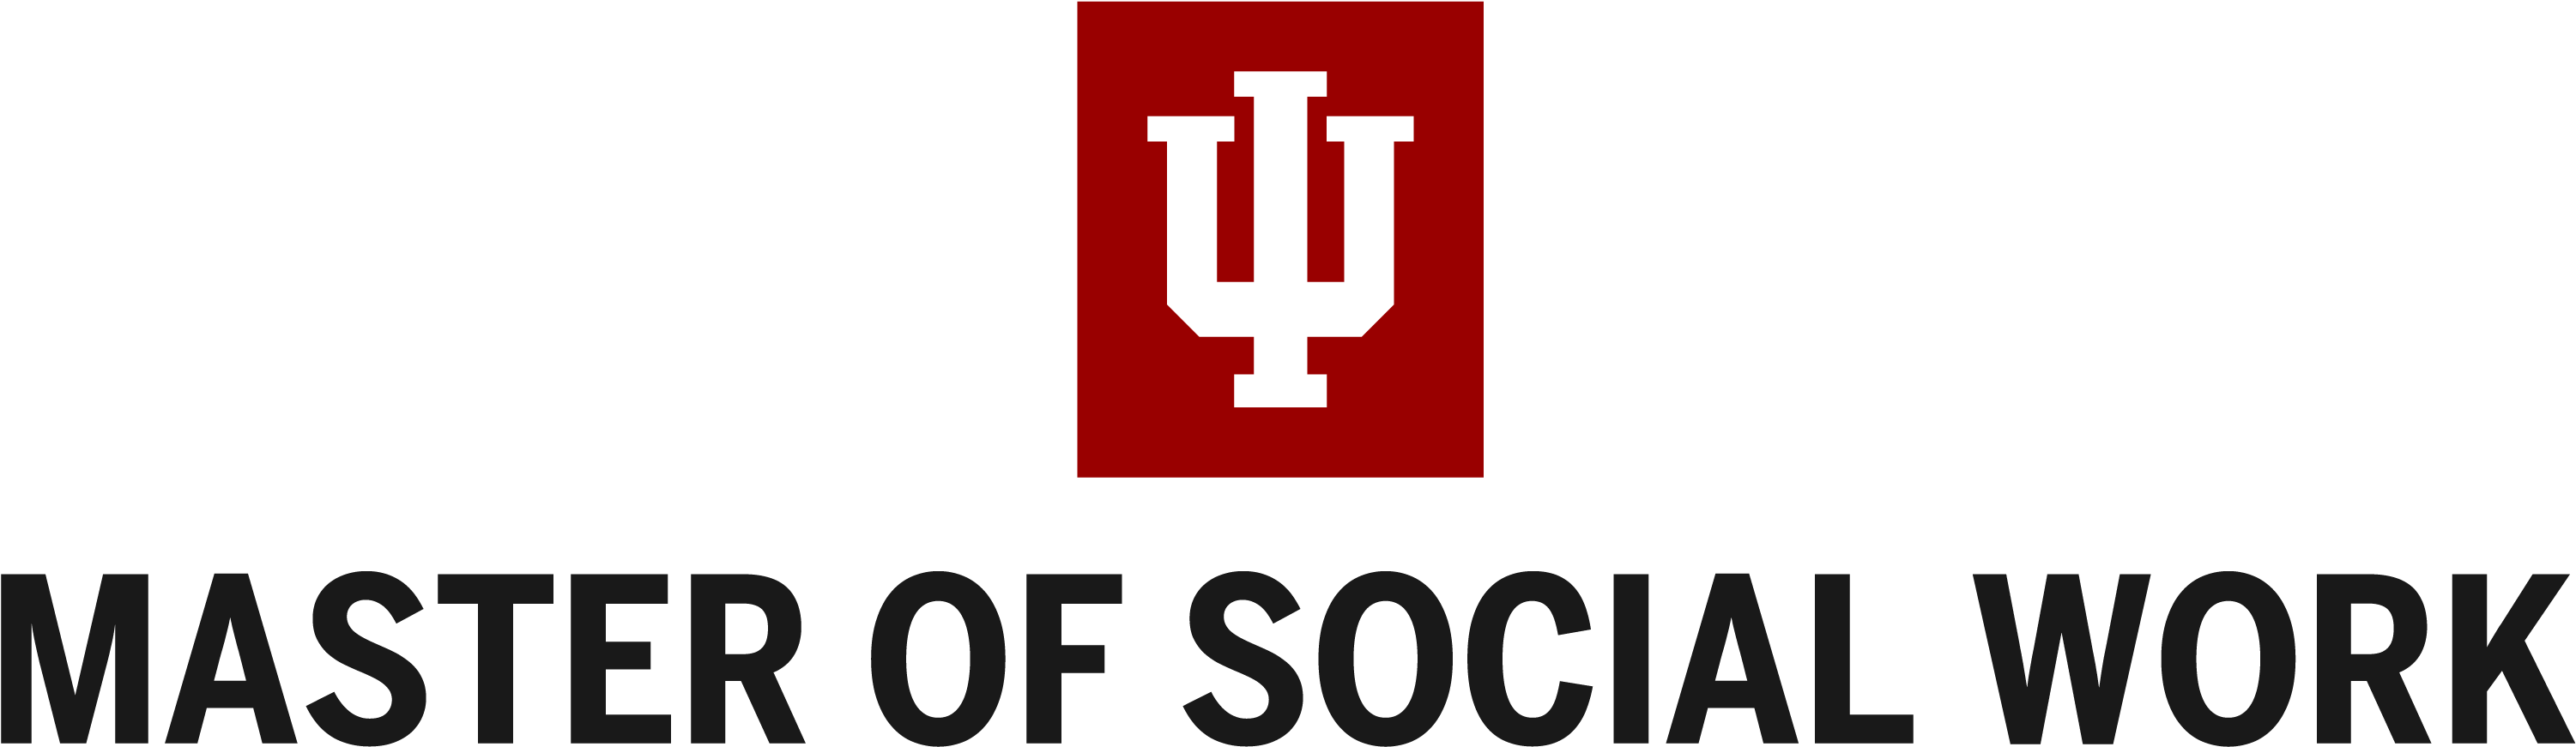 Indiana University (3101x980), Png Download